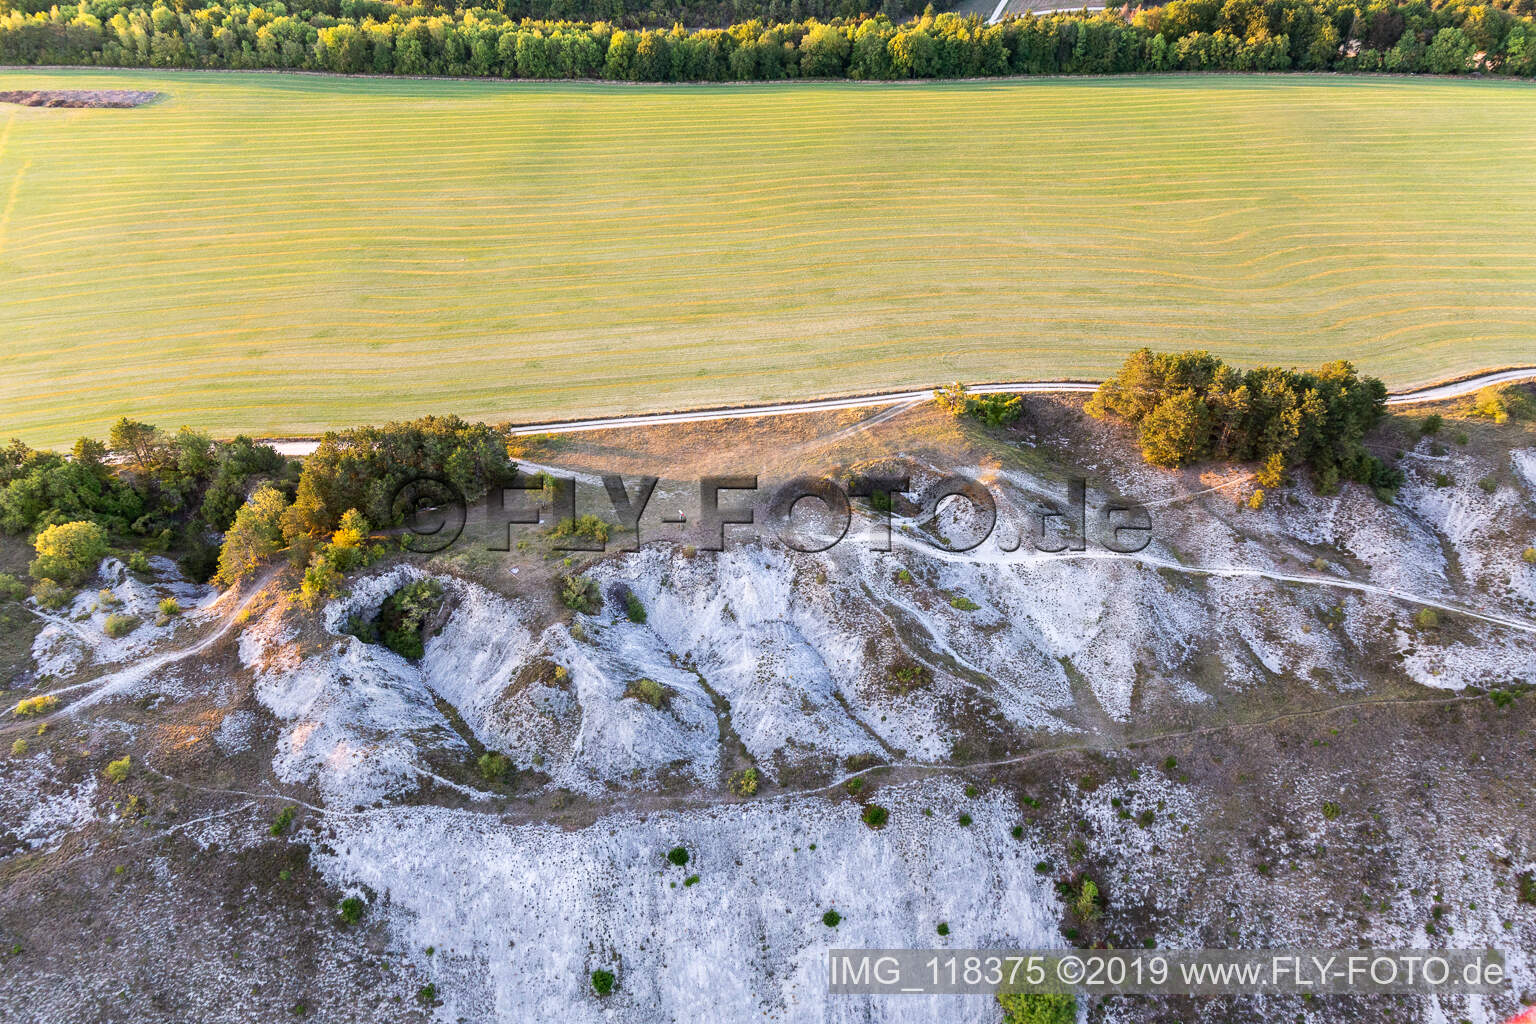 Aerial view of Paragliding launch sites above the Chètre in Champougny in the state Meuse, France